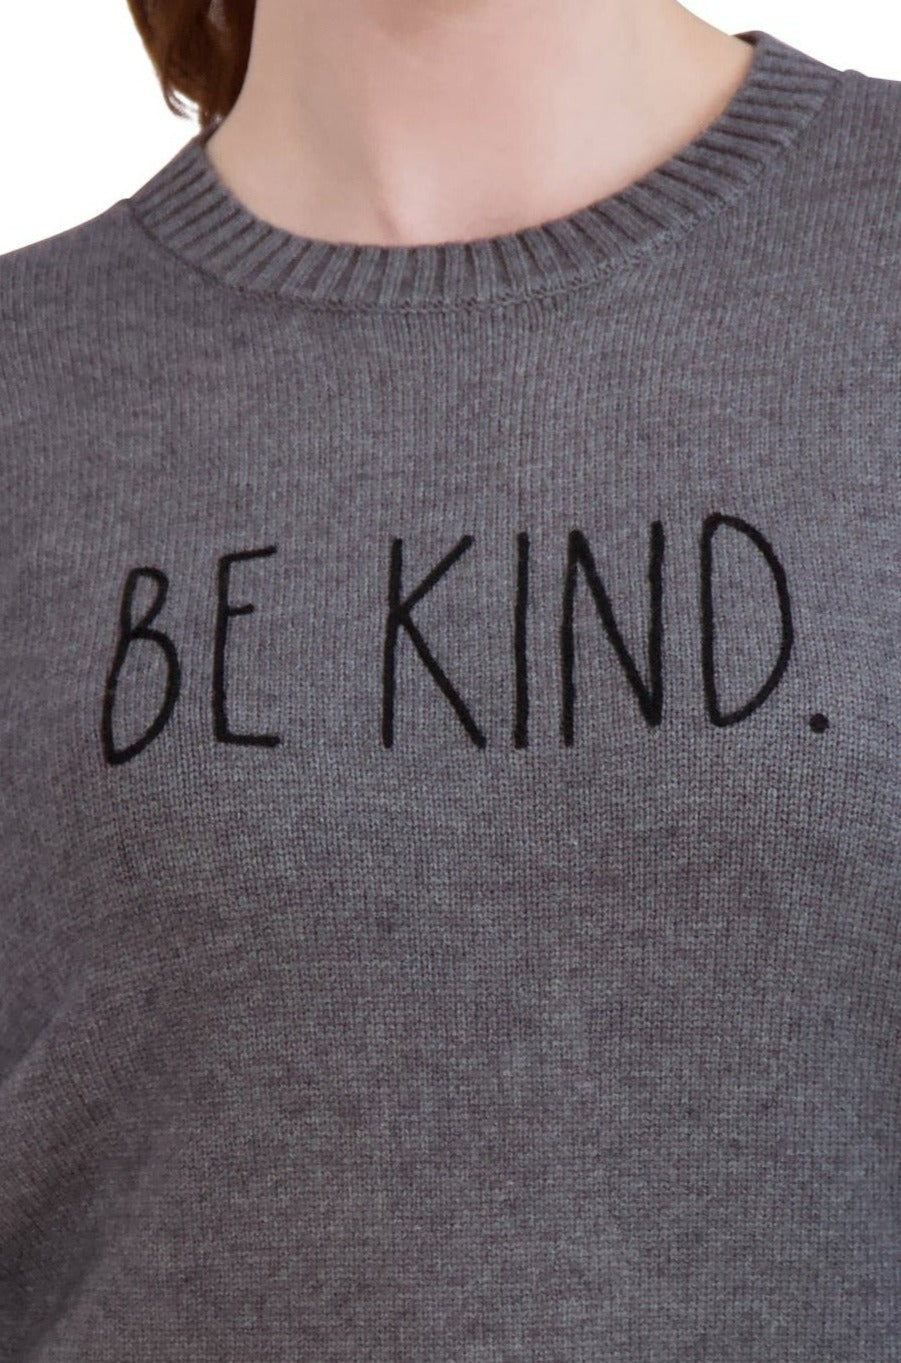 Women's Embroidered "BE KIND" Knit Gray Sweater - Rae Dunn Wear - W Sweater